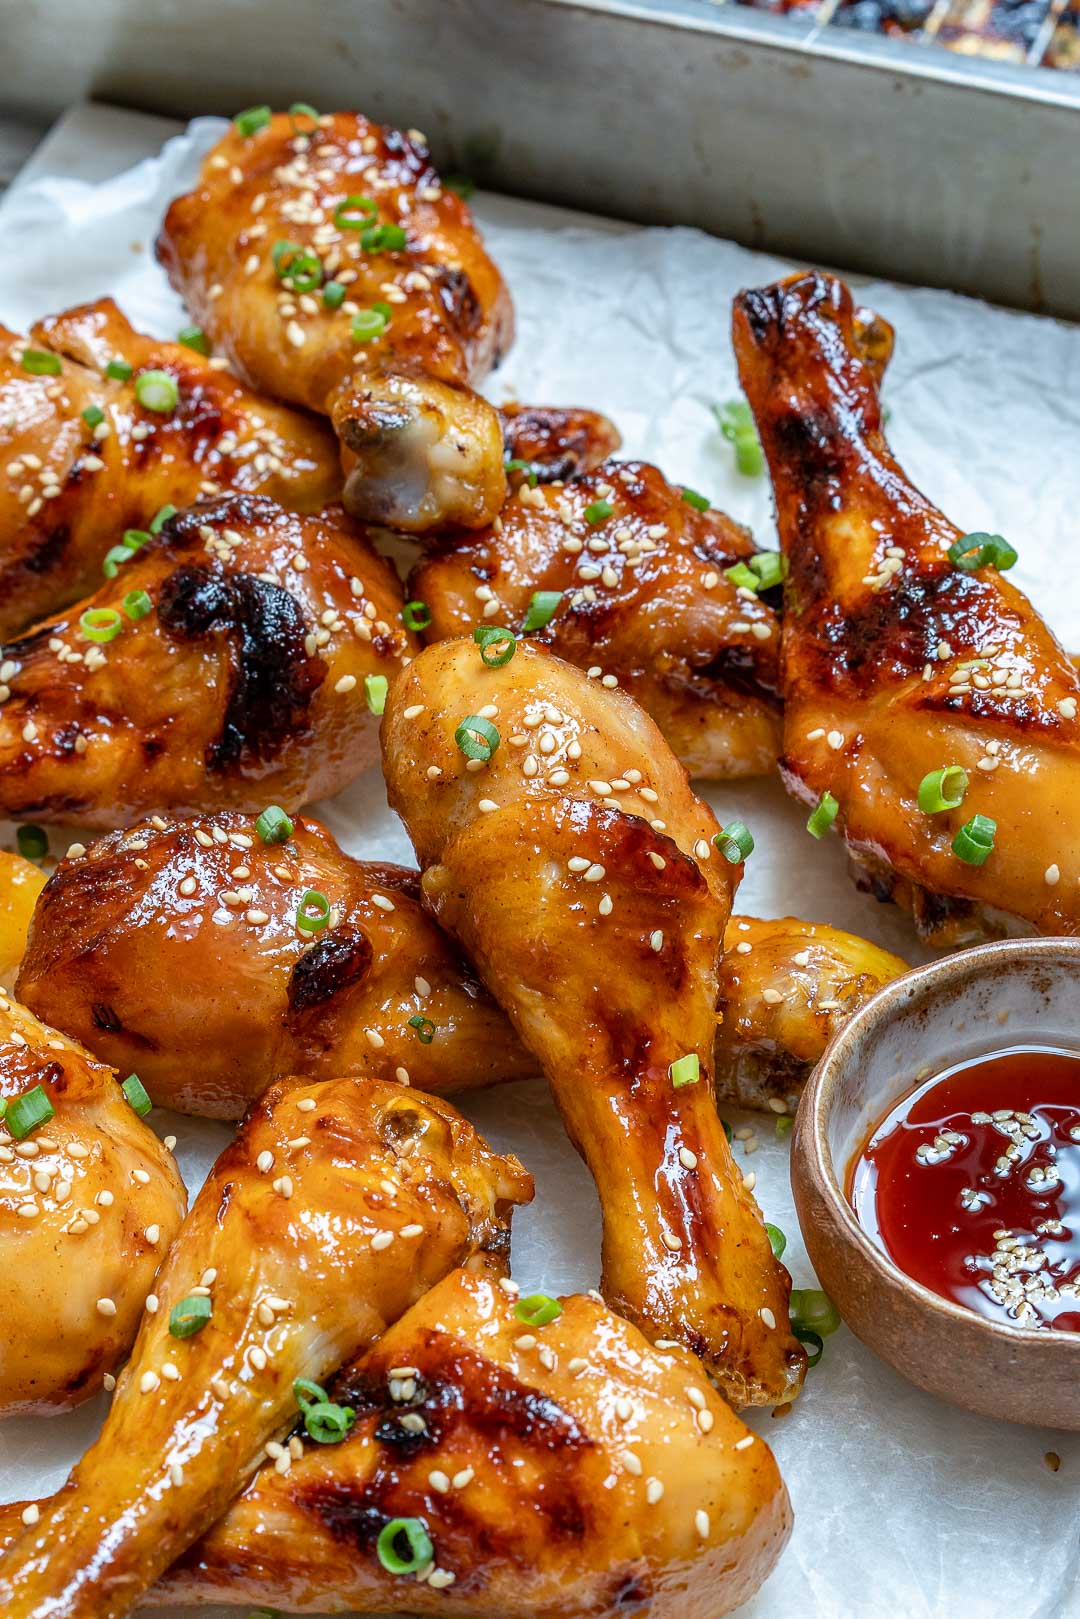 These Healthy Sticky Glazed Chicken Drumsticks are MIND-BLOWING Good!